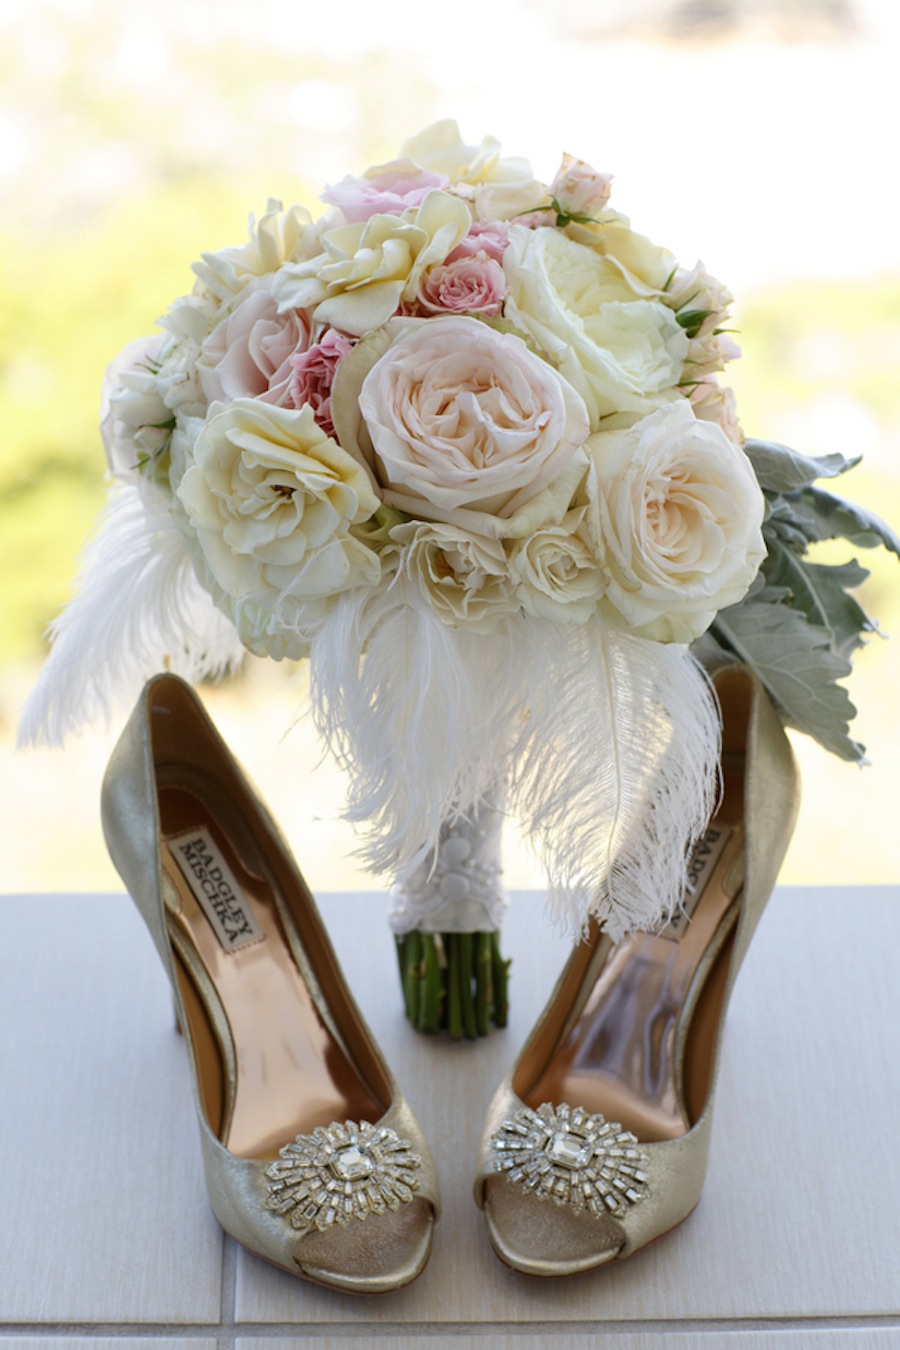 Romantic Pink and White 1920's Inspired Wedding Bouquet | Andrea Layne Floral Design | Badgley Mischka Wedding Shoes